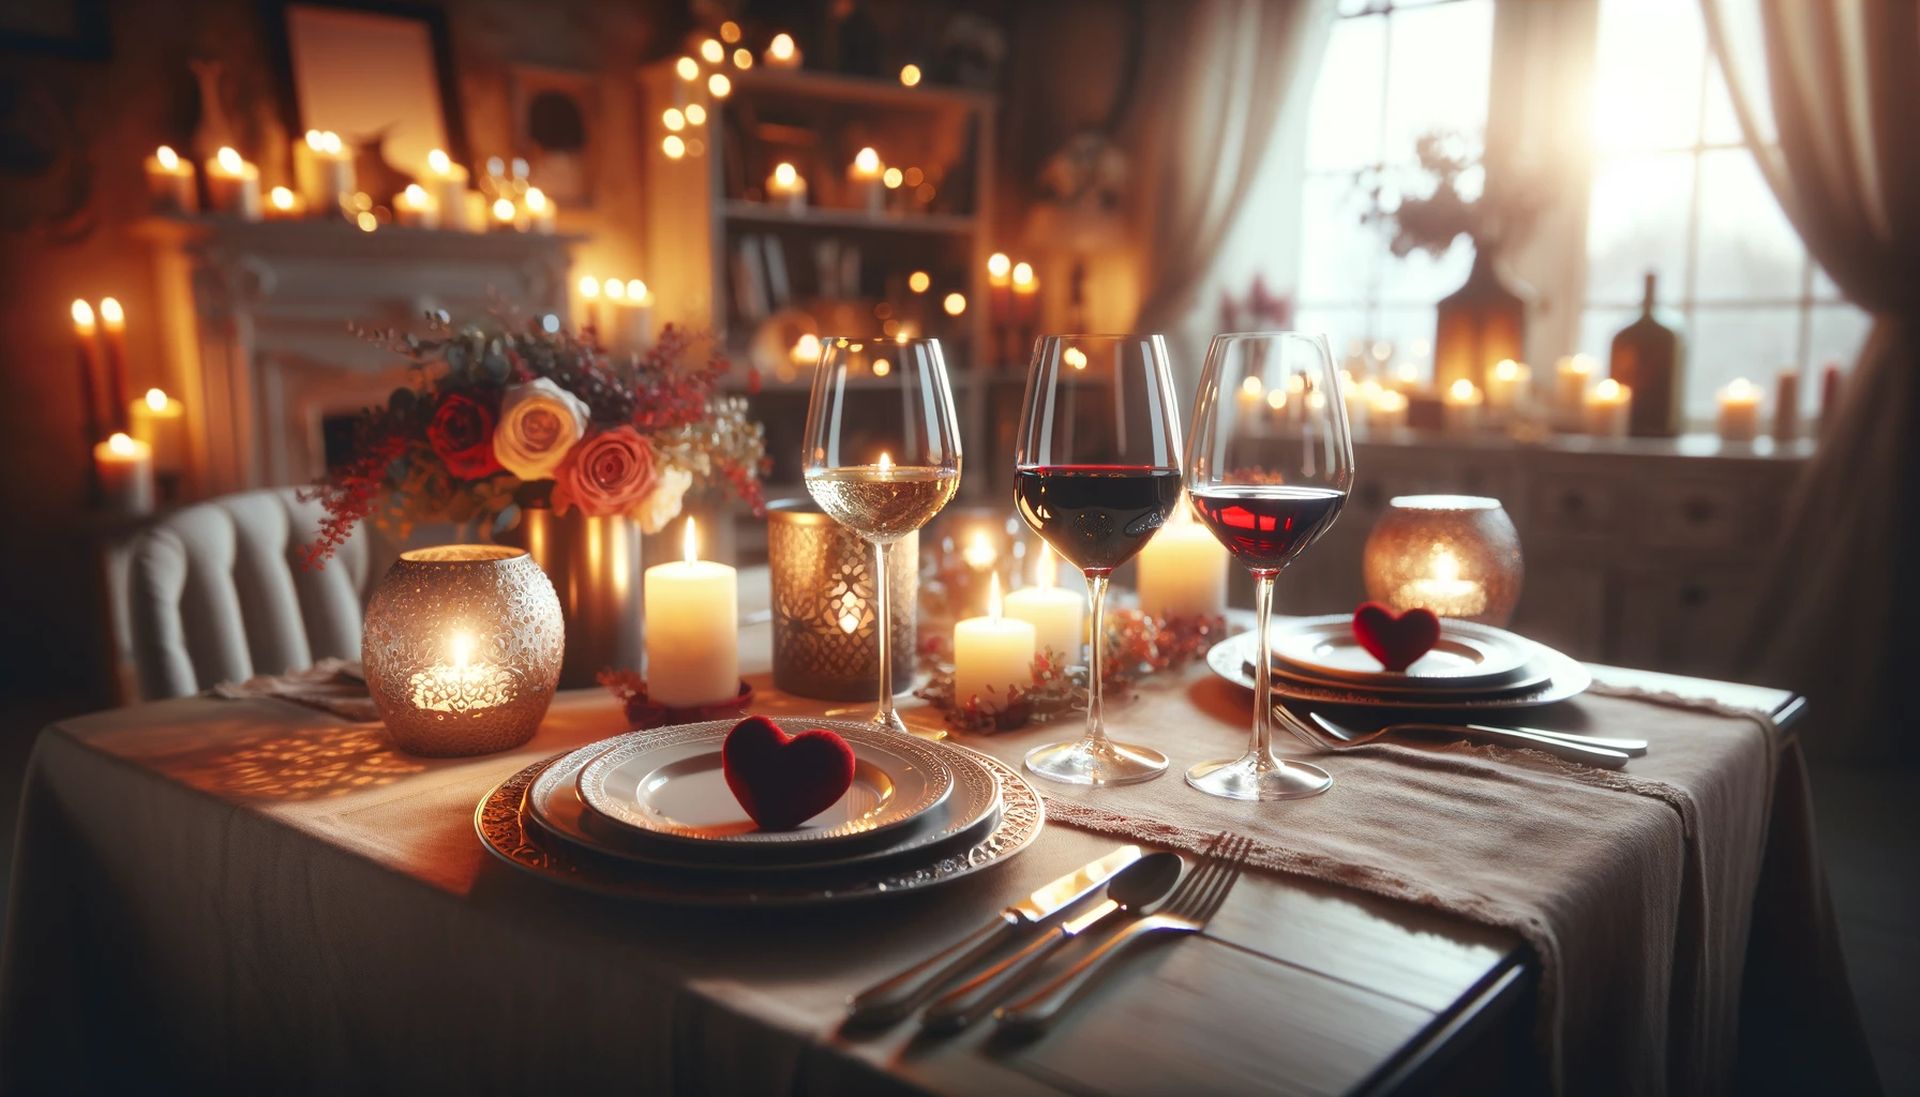 Valentine's Day Recipes and Wine Pairings guide, featuring a romantic dinner setting with exquisite dishes and perfectly matched wines. | Credit: Encyclopedia Wines